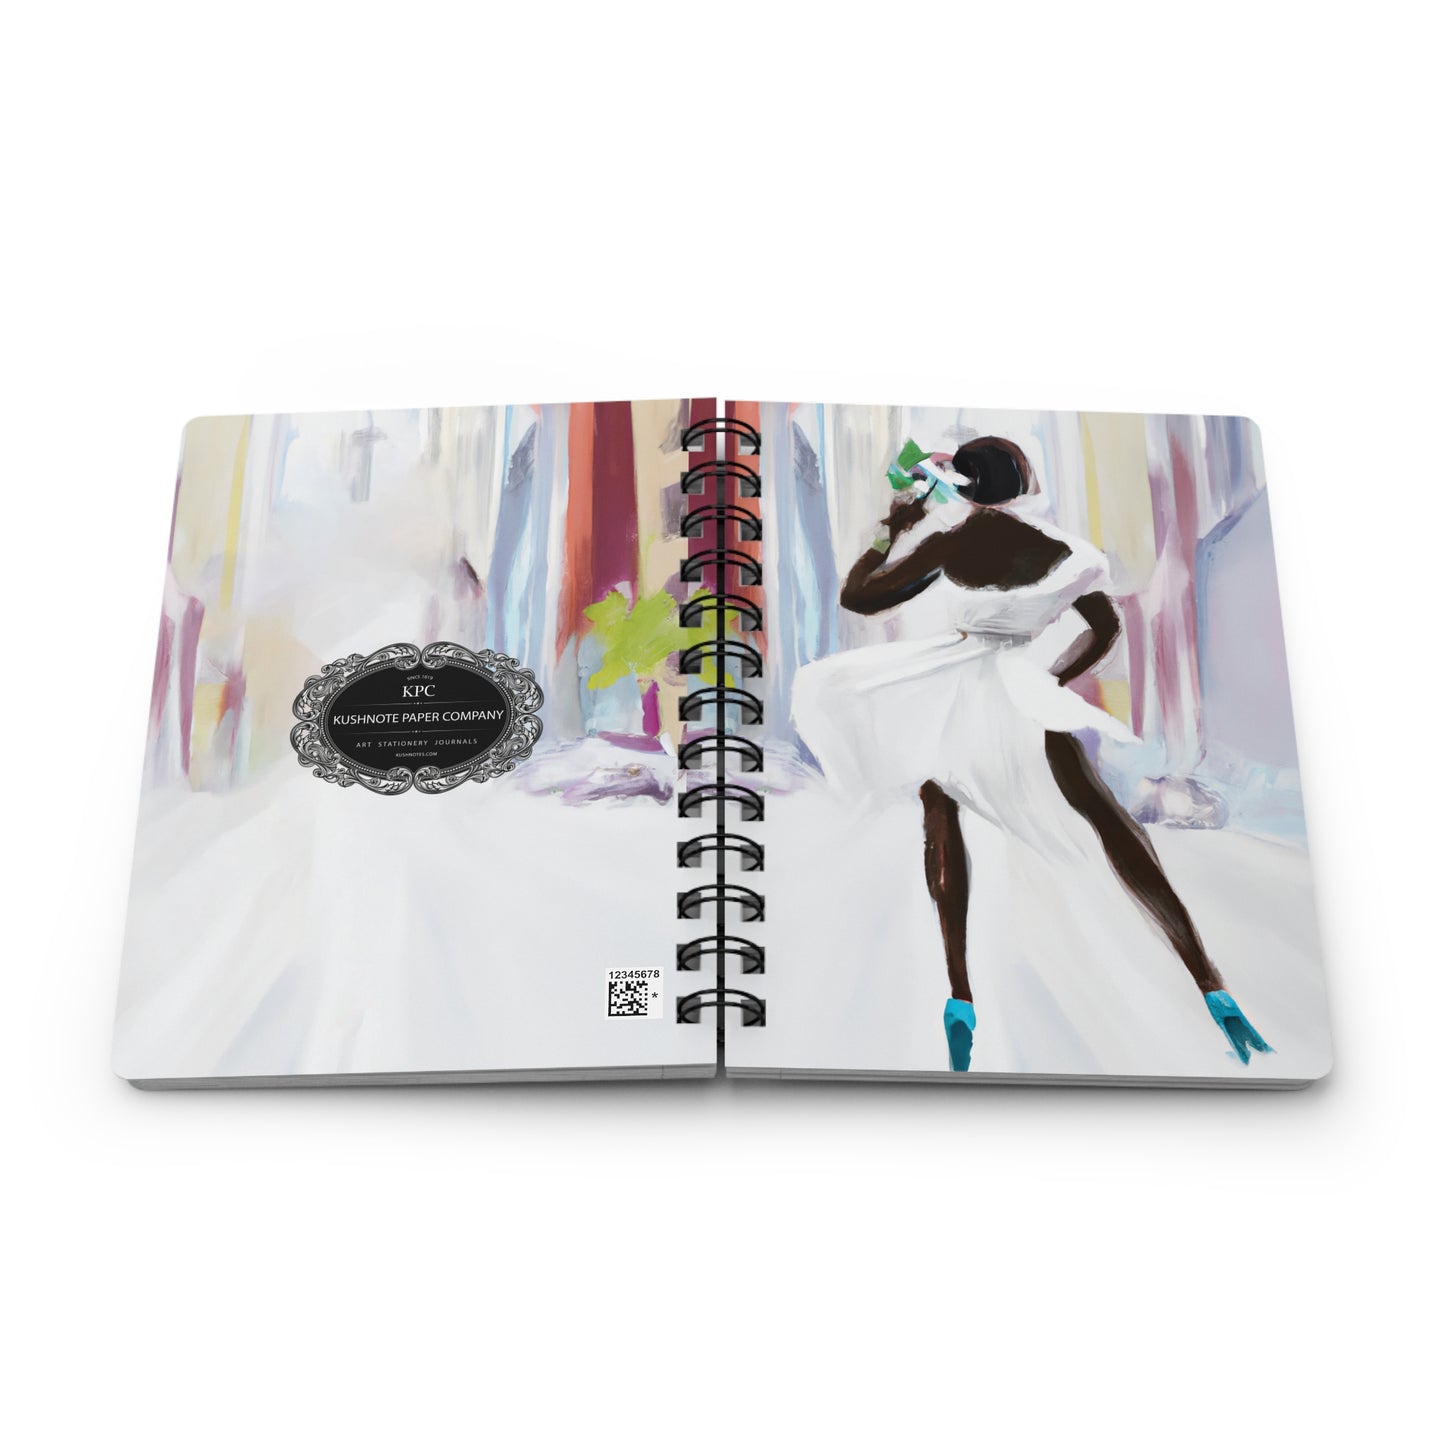 Mary Spiral Bound Notebooks and Journals with 2023-2024 Year-at-a-Glance Calendar